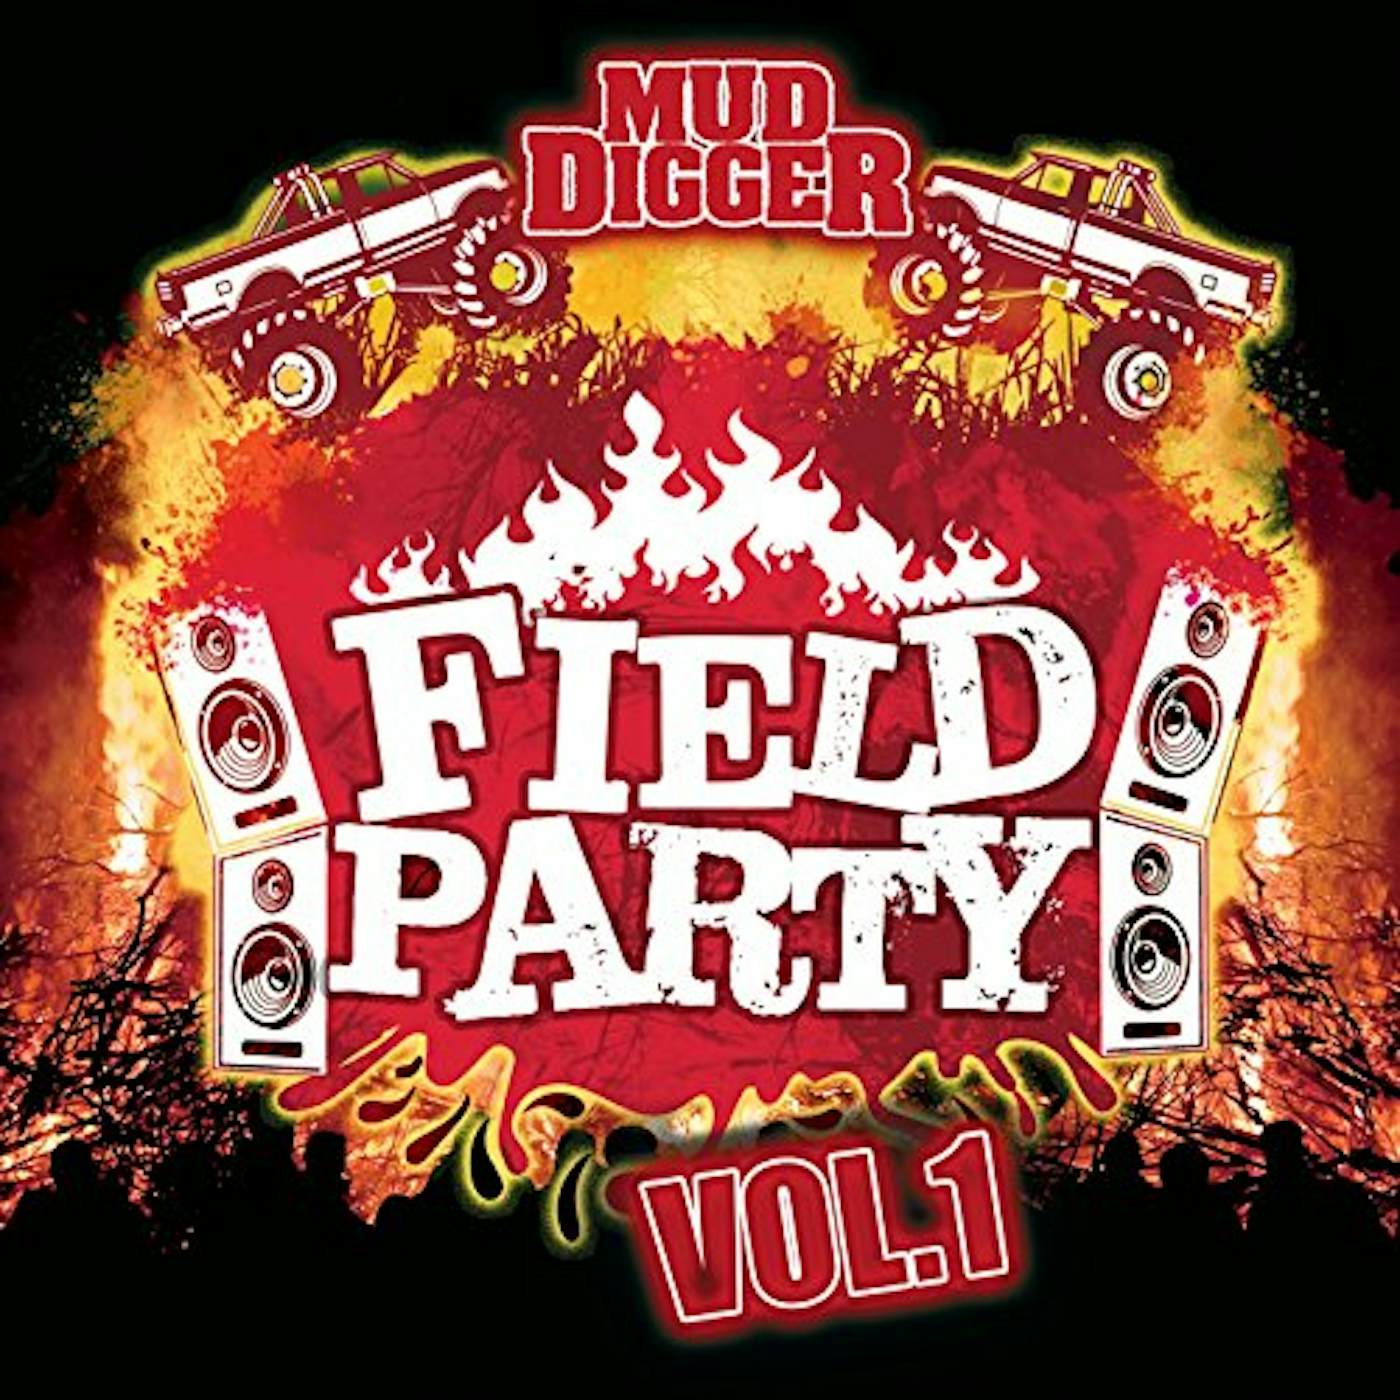 Mud Digger FIELD PARTY VOLUME 1 CD